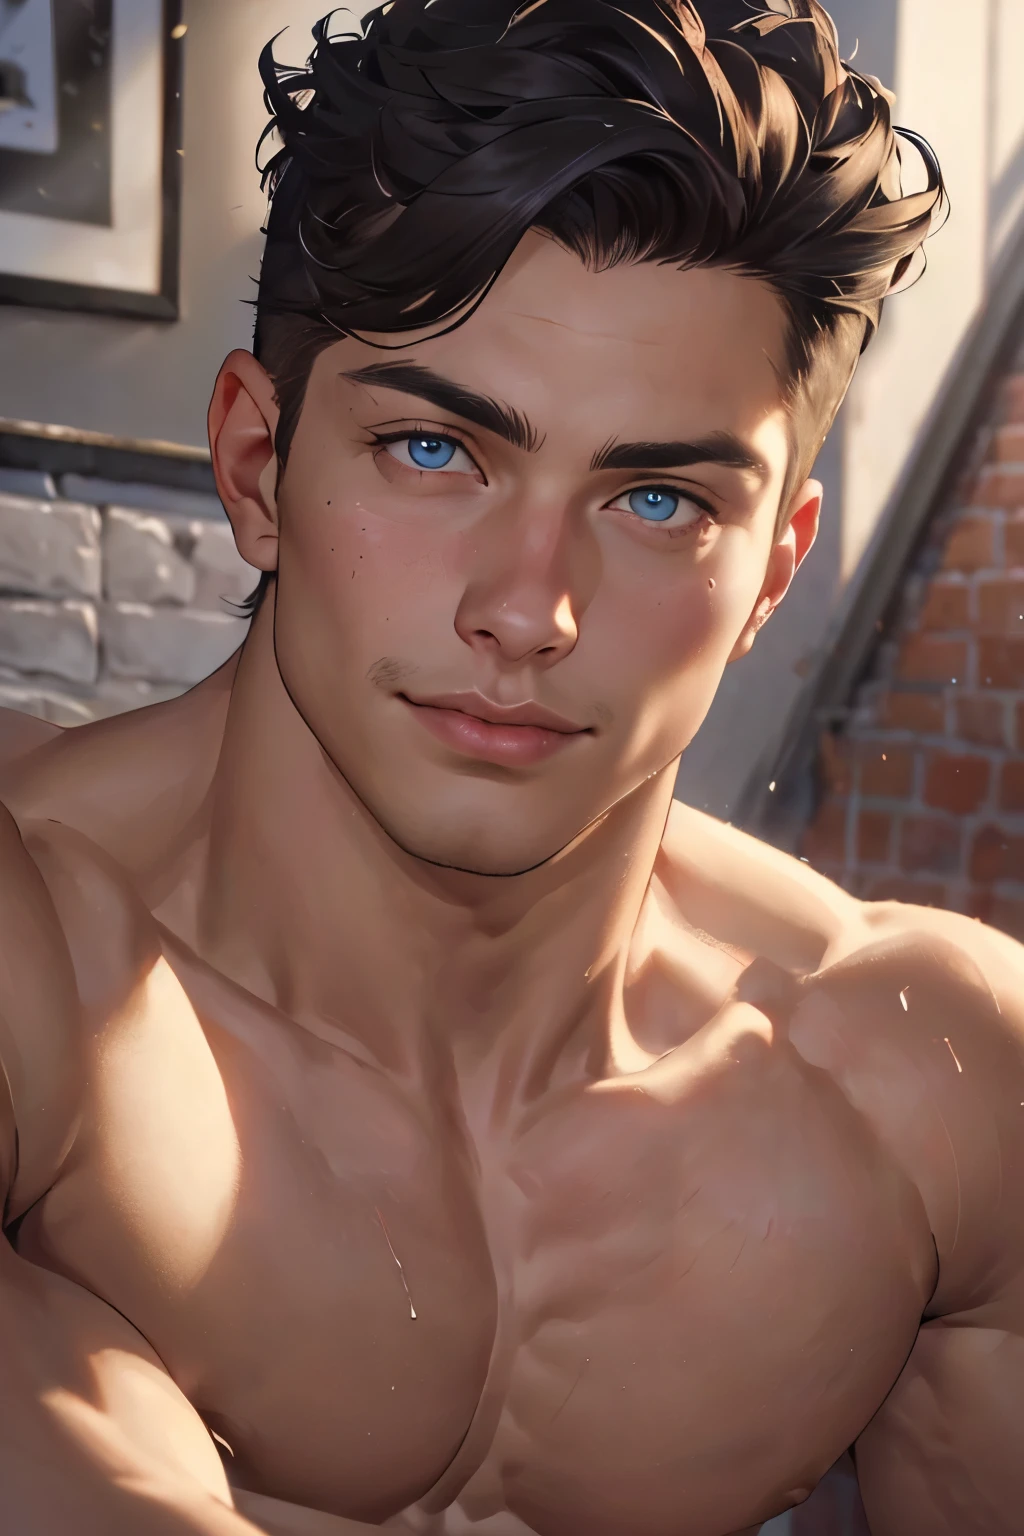 ((the best quality)), ((Masterpiece)), (details), perfect face, high definition, Masterpiece,4k,details clearly, Handsome face, white skin, perfect body, male body, strong muscles, abdomen, blue eyes, white skin, The most handsome man in the world, handsome, The coolest face, Male characters, close image (1man, shirtless), young man, mischievous smile, Extremely muscular tall man, open your eyes ((detailed eyes)), huge, muscular body and Massive, bulging pecs, muscular abs, narrow waist, short hair, blue eyes, delicate big eyes, carefree expression, clear face, handsome (detailed face, perfect face) ((extremely realistic shadows, bodybuilding posture, human, ((22-year-old young man)), V shape, Shirtless, topless, close up look, CG sense, Textured skin, the best quality, Storytelling images, lower your pants, show Panty line, Show your abs, show arm muscle, Black hair, shining blue eyes, eyes contact, high school